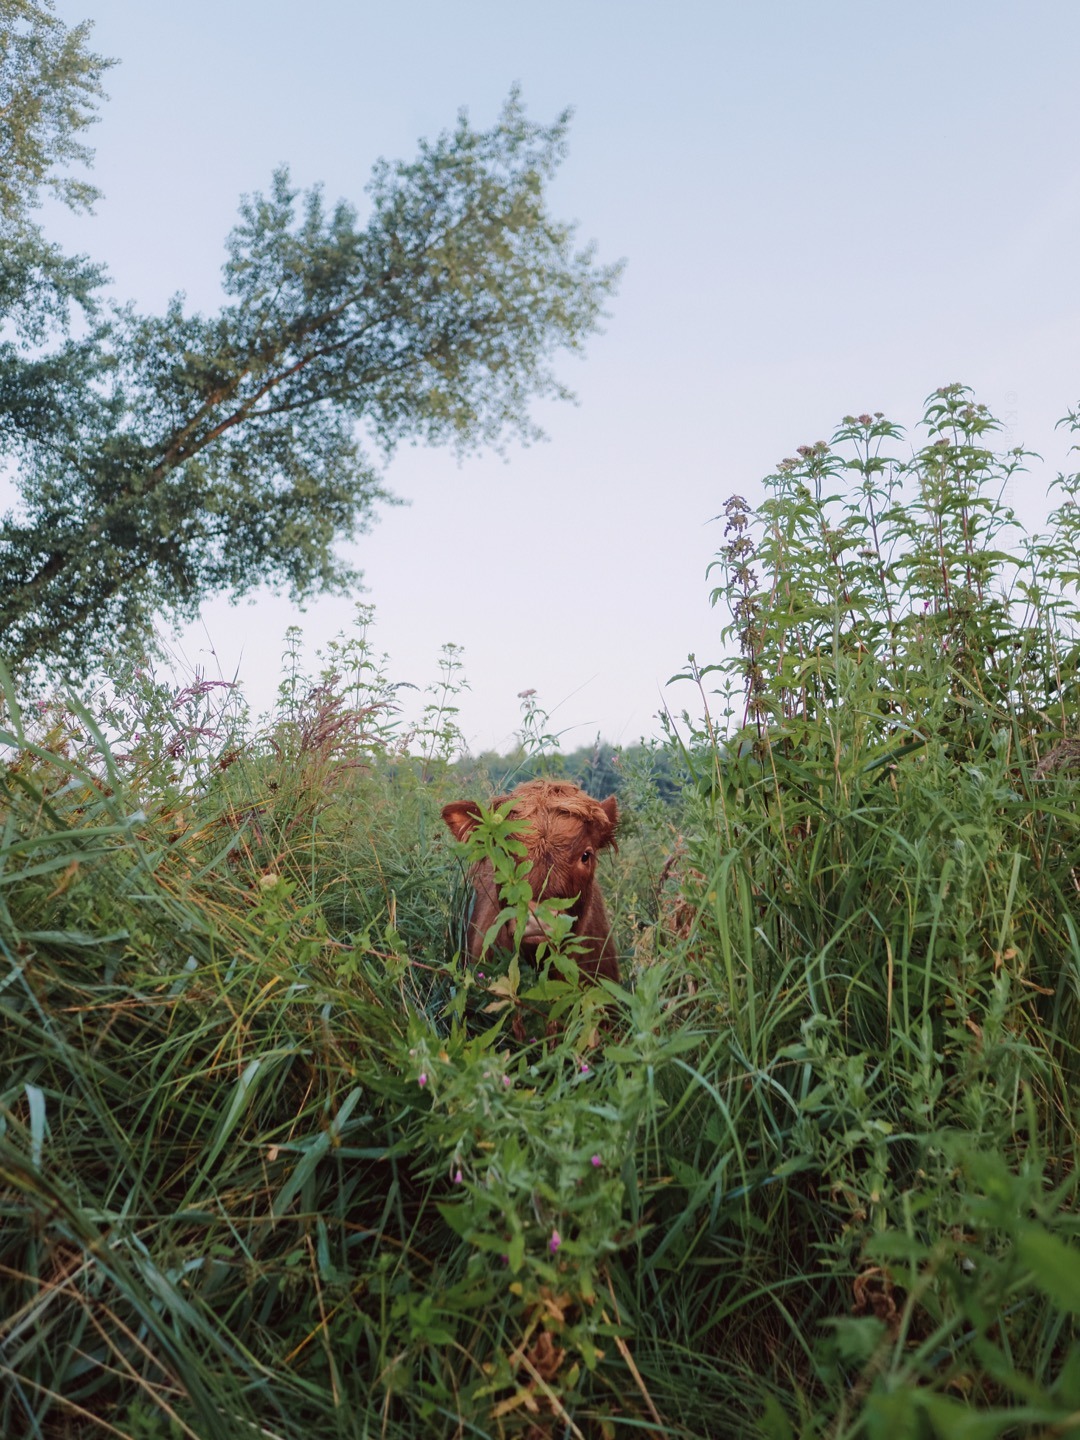 klaasfoto: Hide and seek 2019. After playing hide and seek with cows for three years